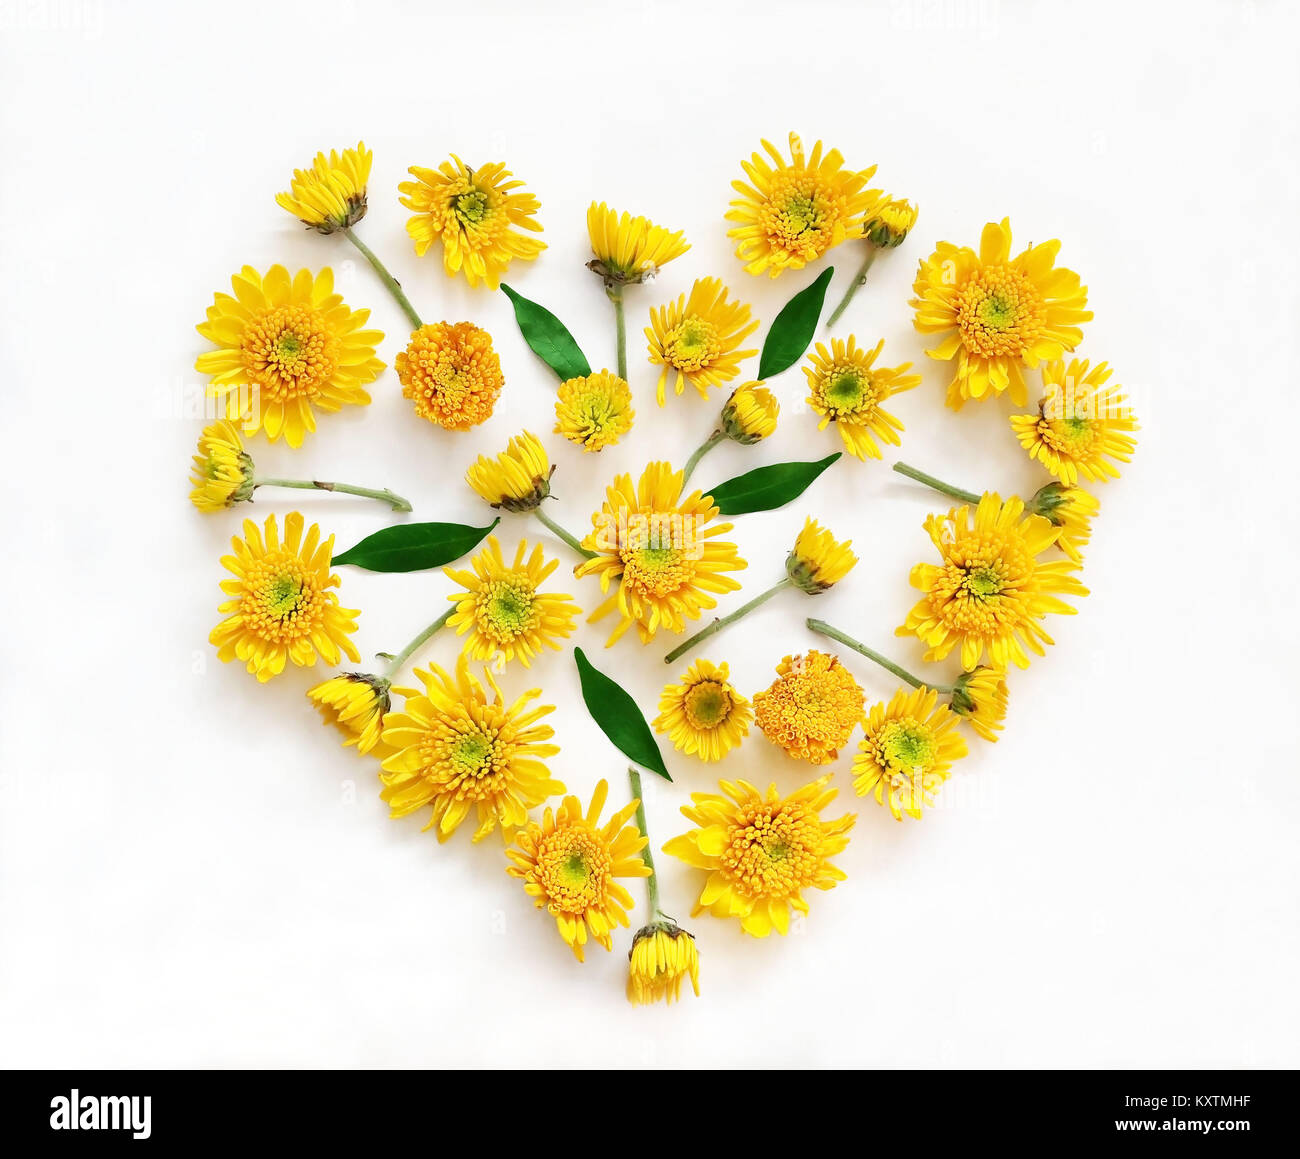 Flowers composition in shape of heart made of yellow flowers on white  background. Spring, summer, easter concept. Flat lay, top view Stock Photo  - Alamy